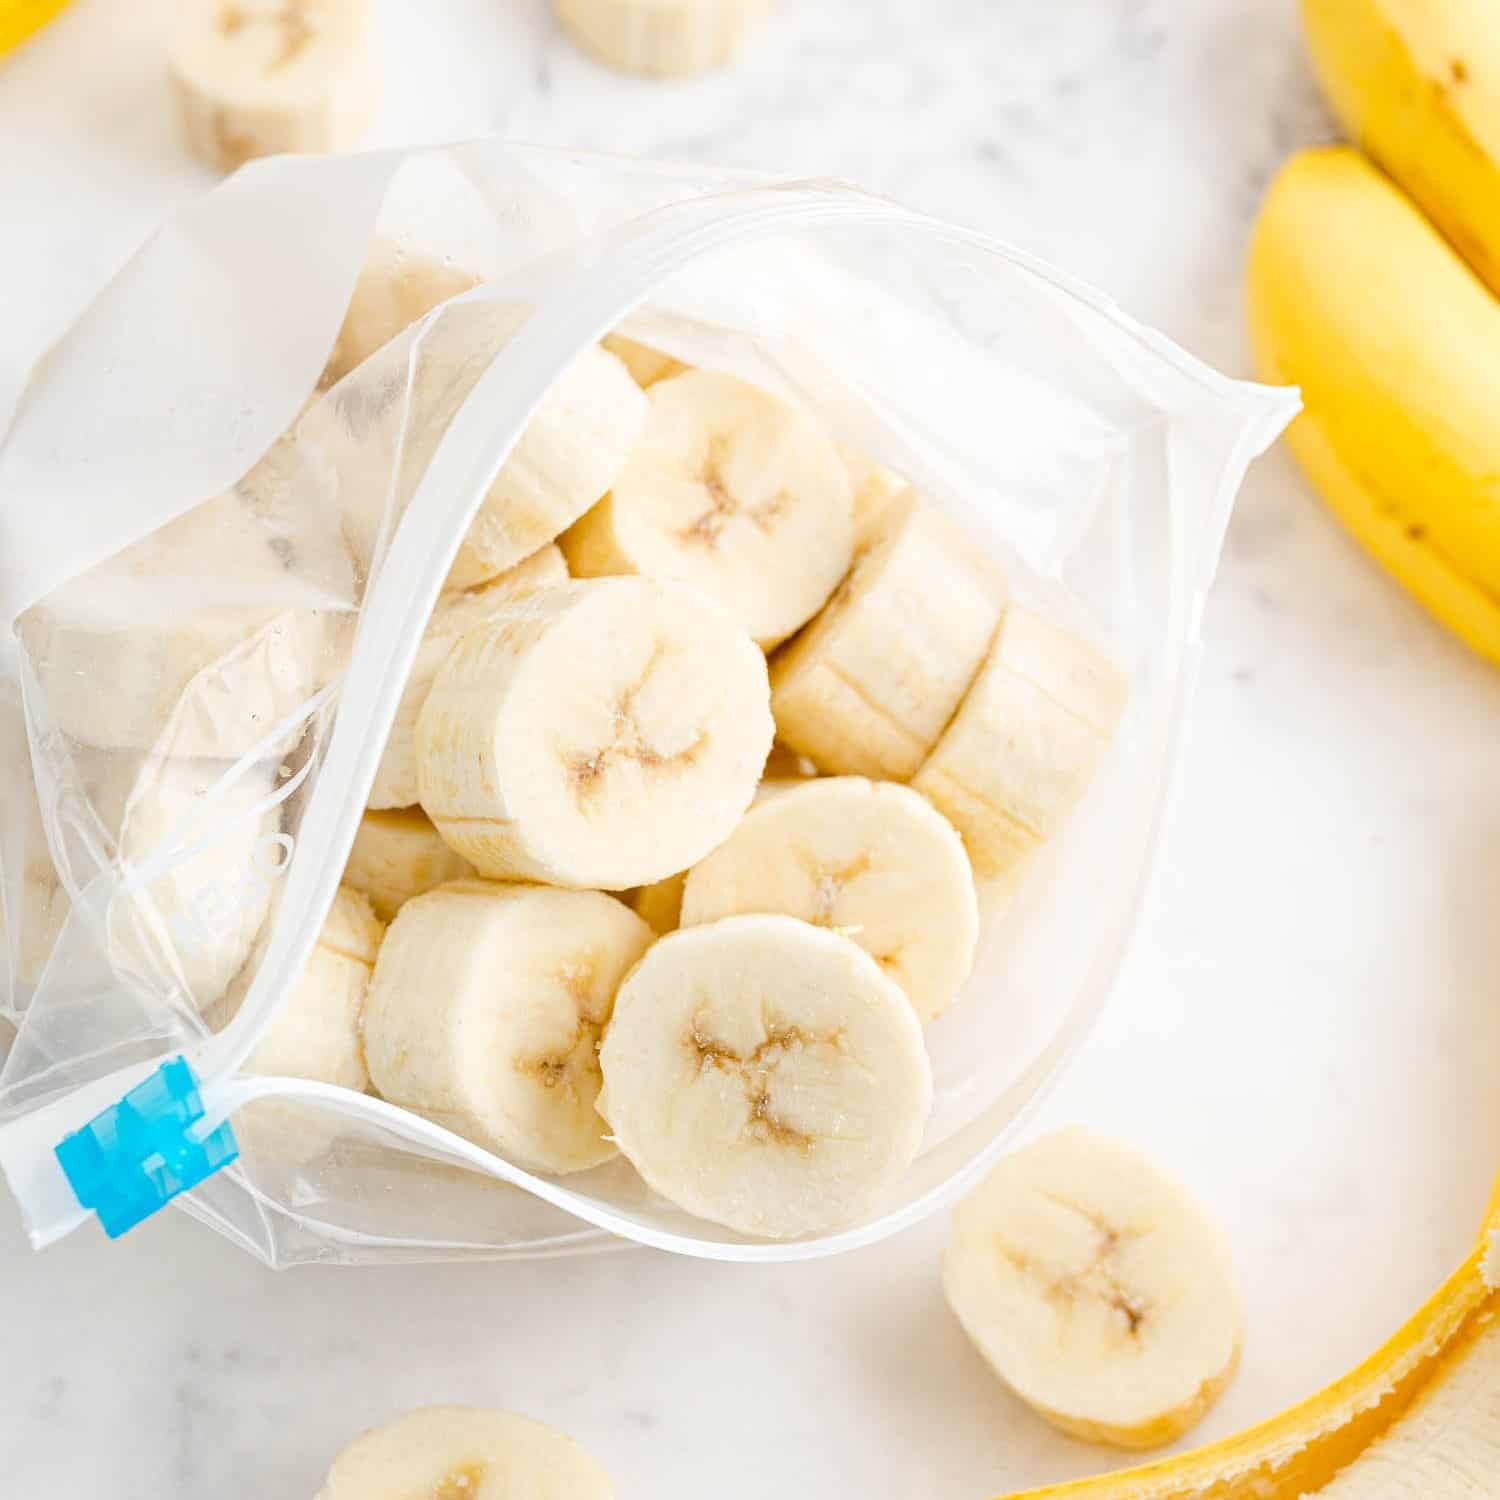 https://www.rachelcooks.com/wp-content/uploads/2022/02/How-To-Freeze-Bananas-Images027-SQUARE.jpg